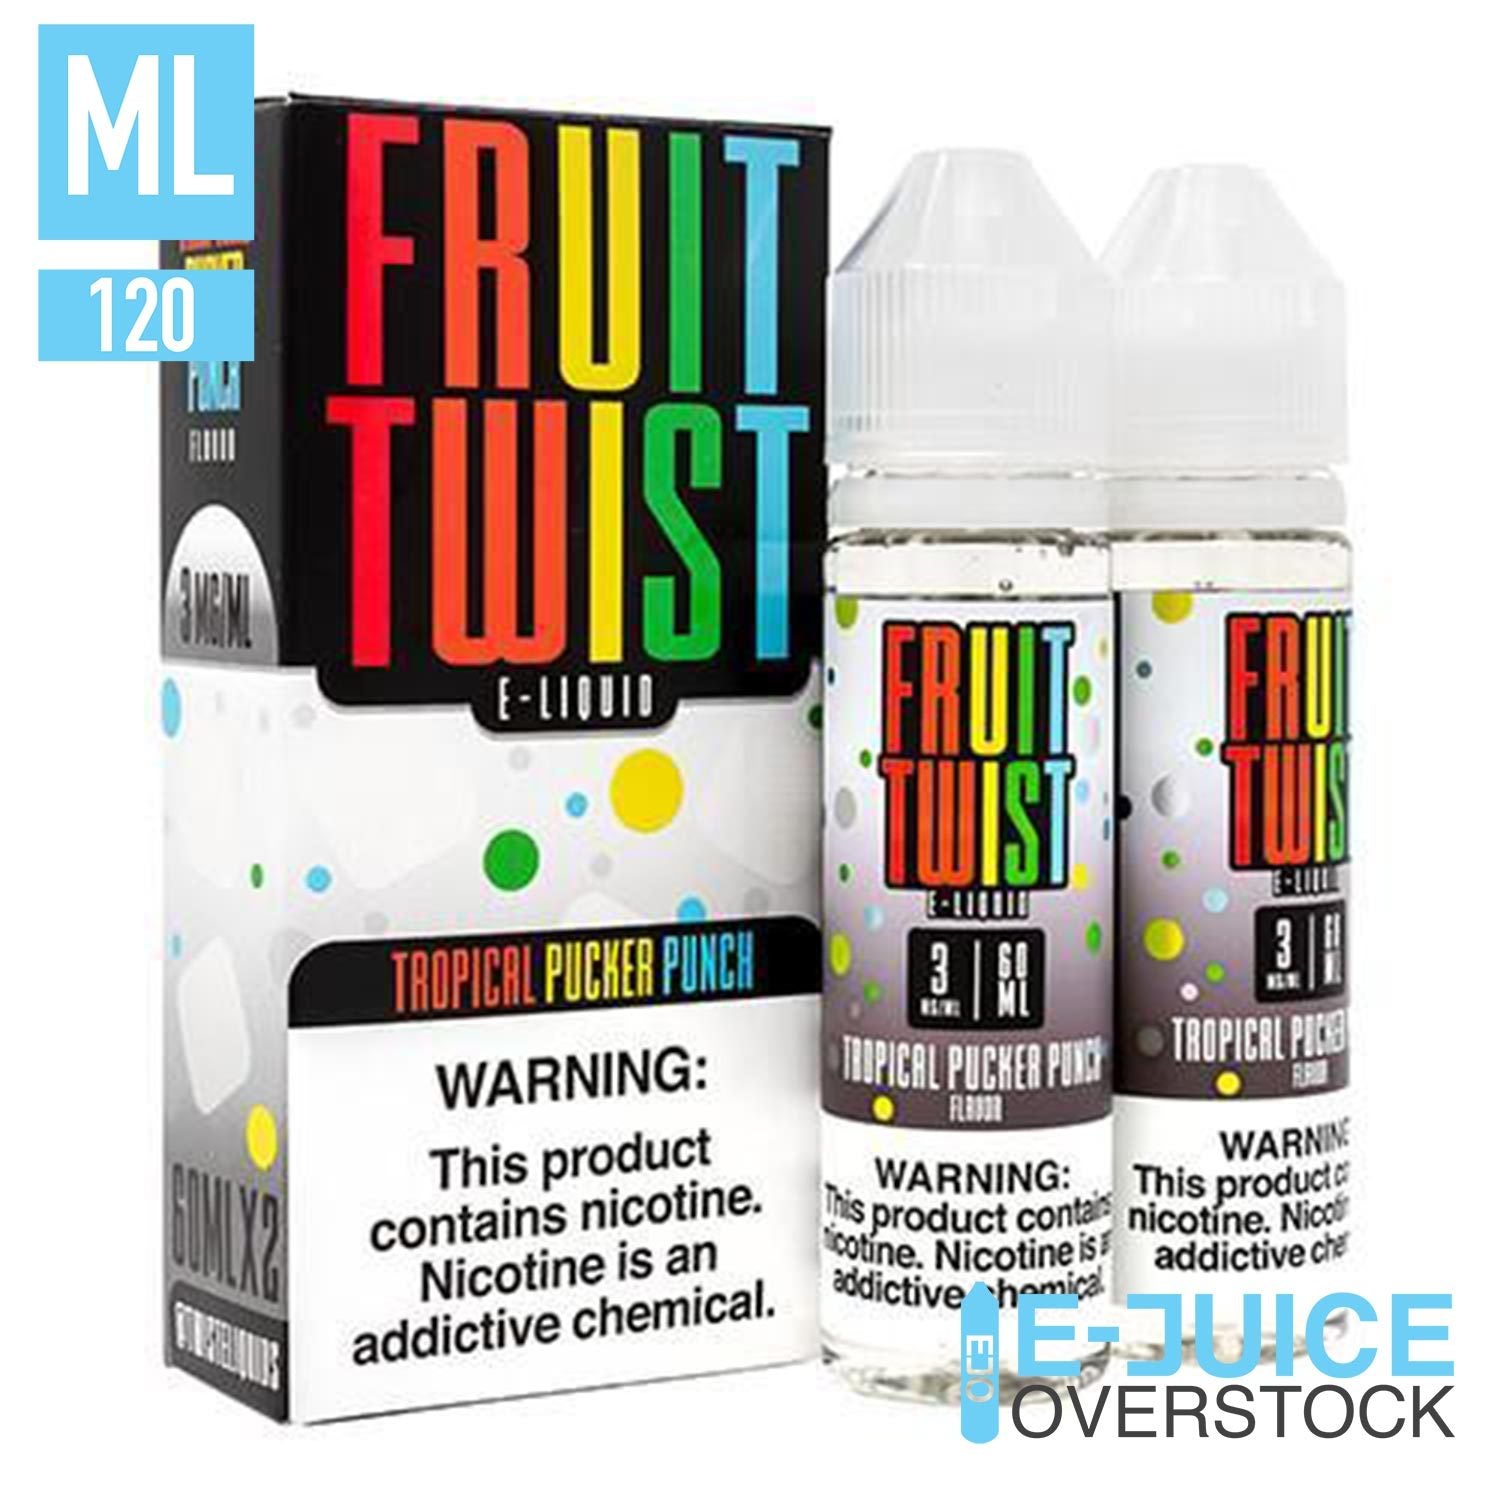 BLEND NO 1 (Tropical Pucker Punch) by Fruit Twist 120ML EJUICE - EJUICEOVERSTOCK.COM